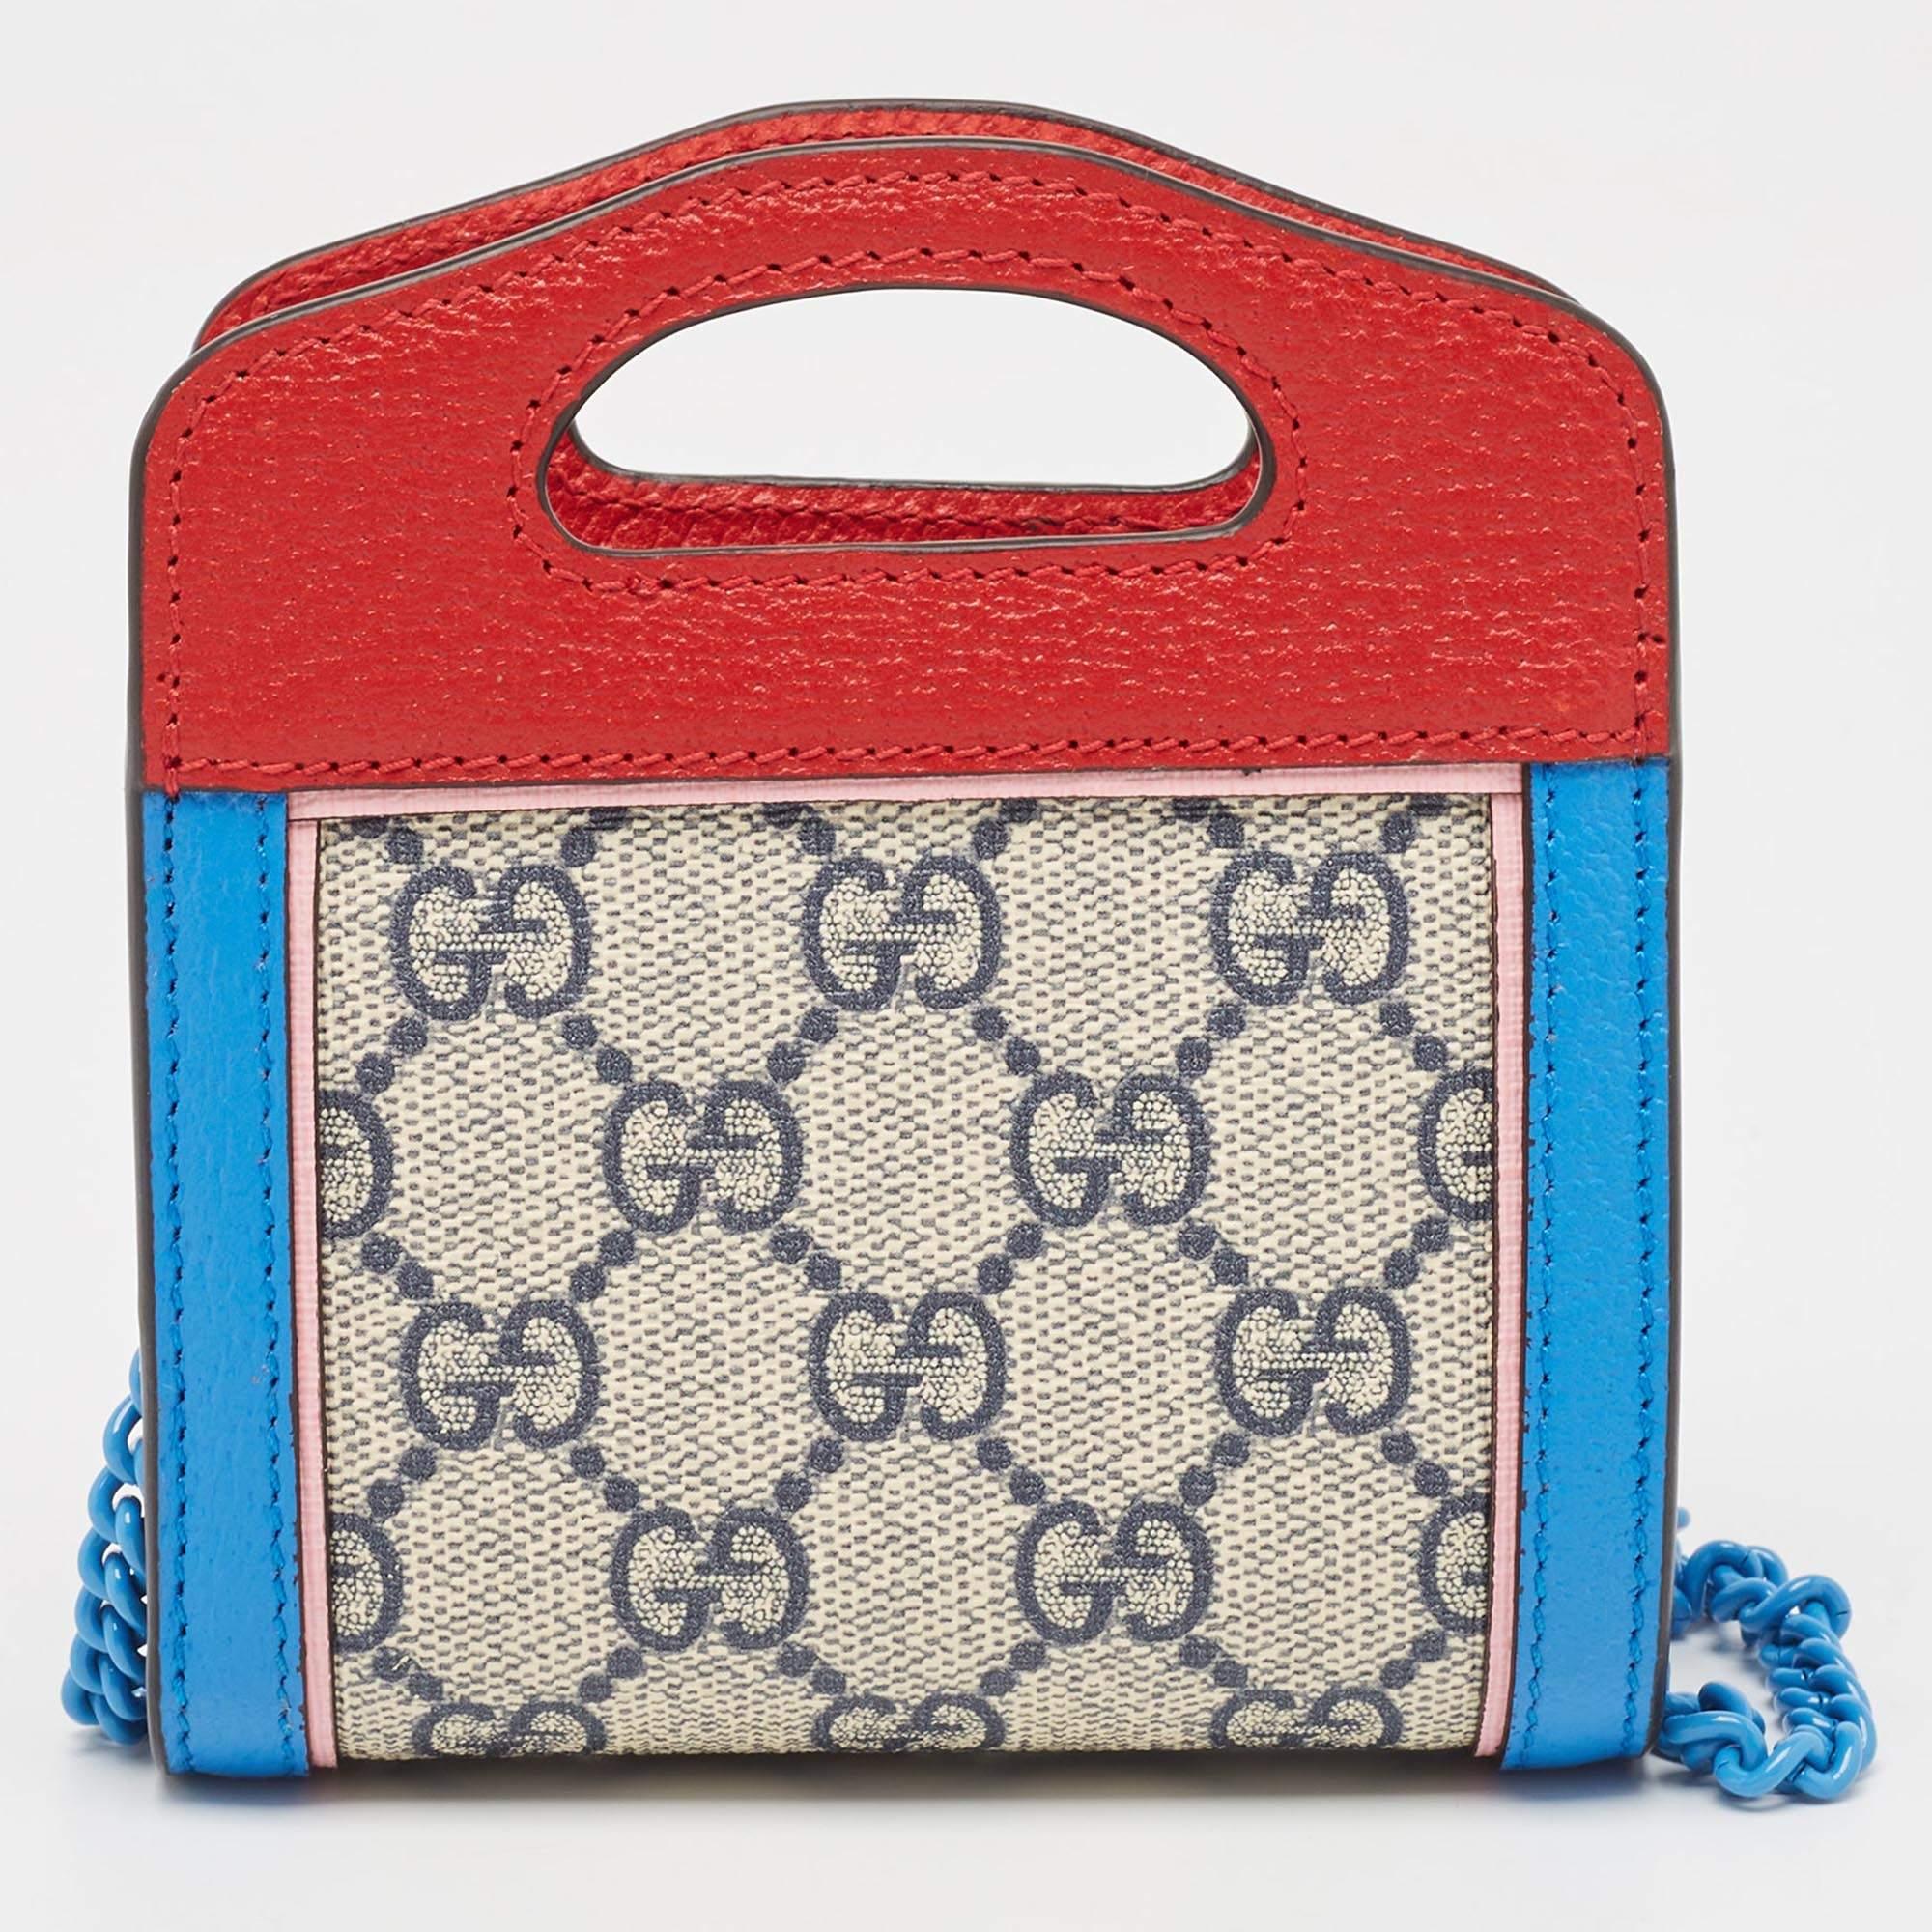 The Gucci wallet on chain exudes sophistication and style. Crafted from premium materials, it features the iconic GG Supreme canvas adorned with a vibrant multicolor pattern, accented with luxurious leather details. Compact yet spacious, it